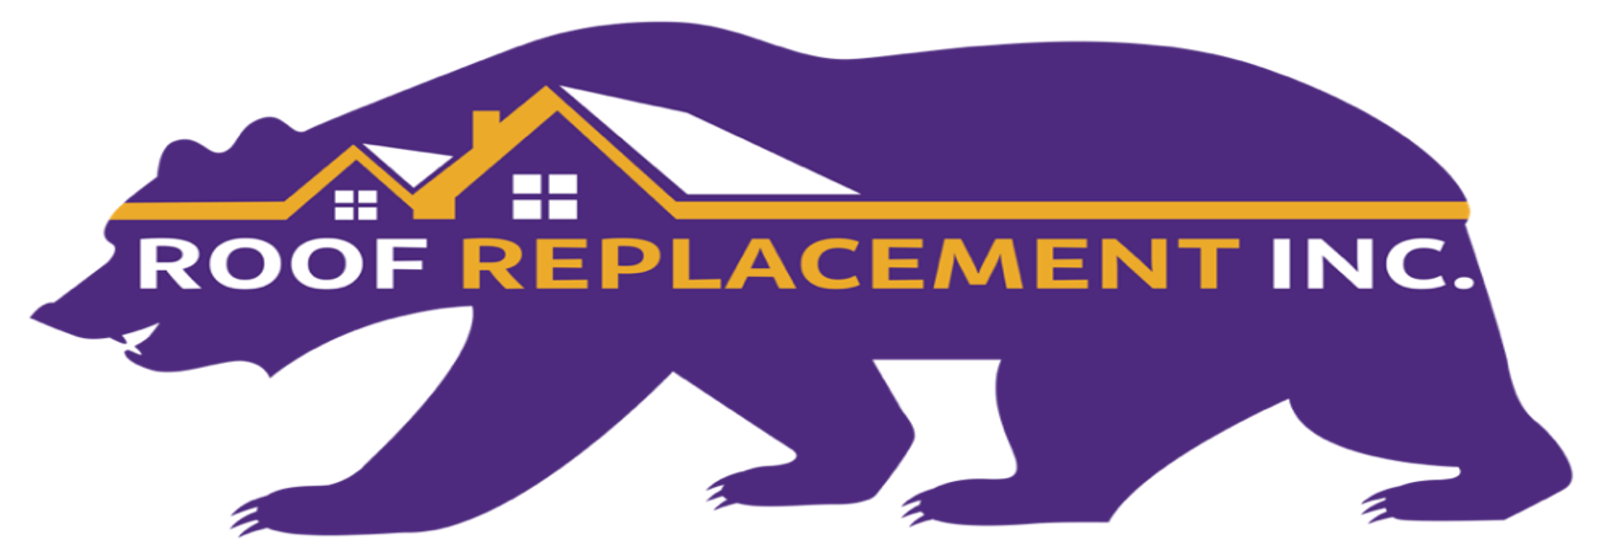 Roof Replacement, Inc. Logo